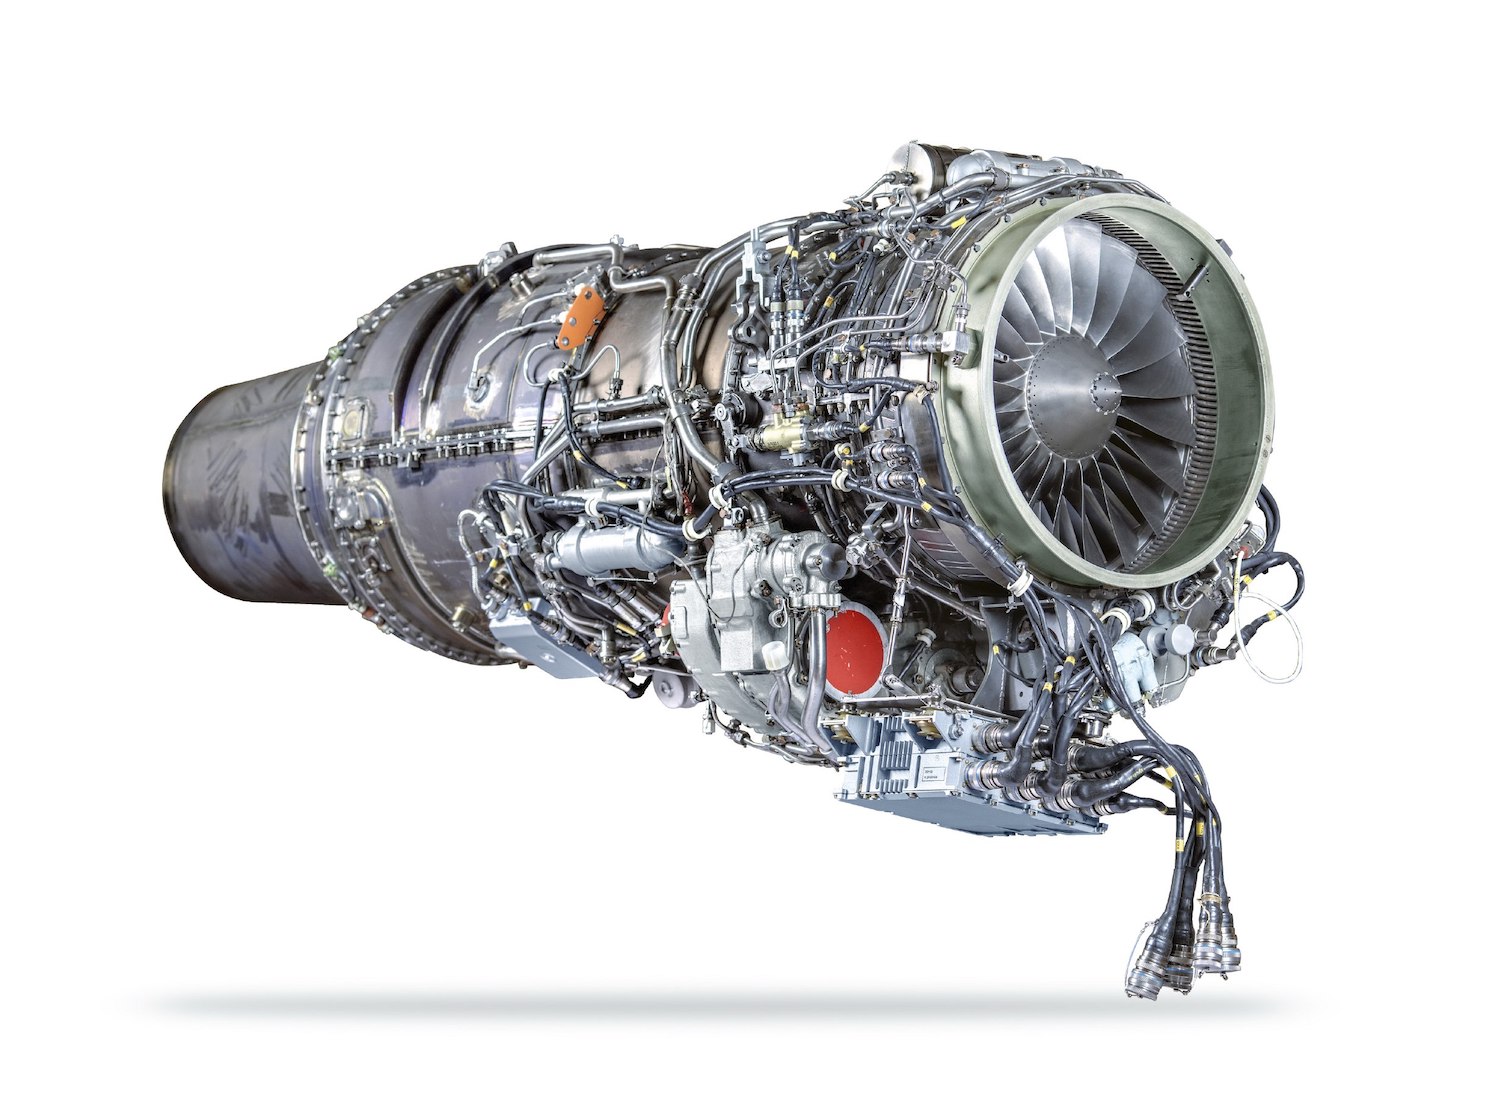 India to Complete Trainer Jet Certification With Freshly Supplied Engines From Rostec